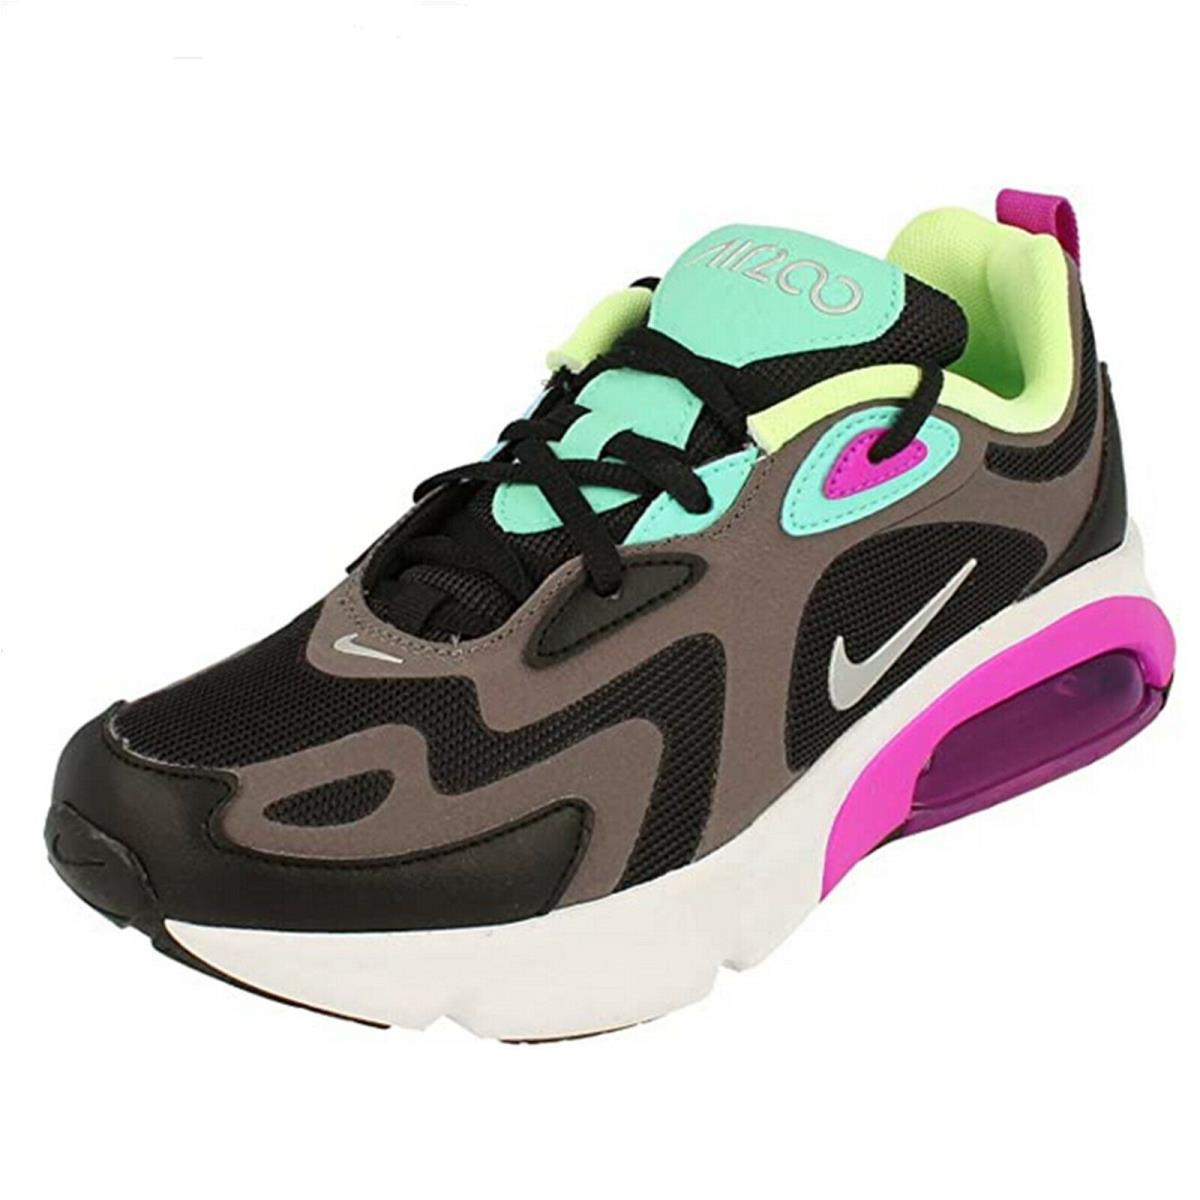 Nike Air Max 200 GS AT5627 - 004 Women`s Running/casual Shoes. NO Lid - BLACK/METALLIC SILVER